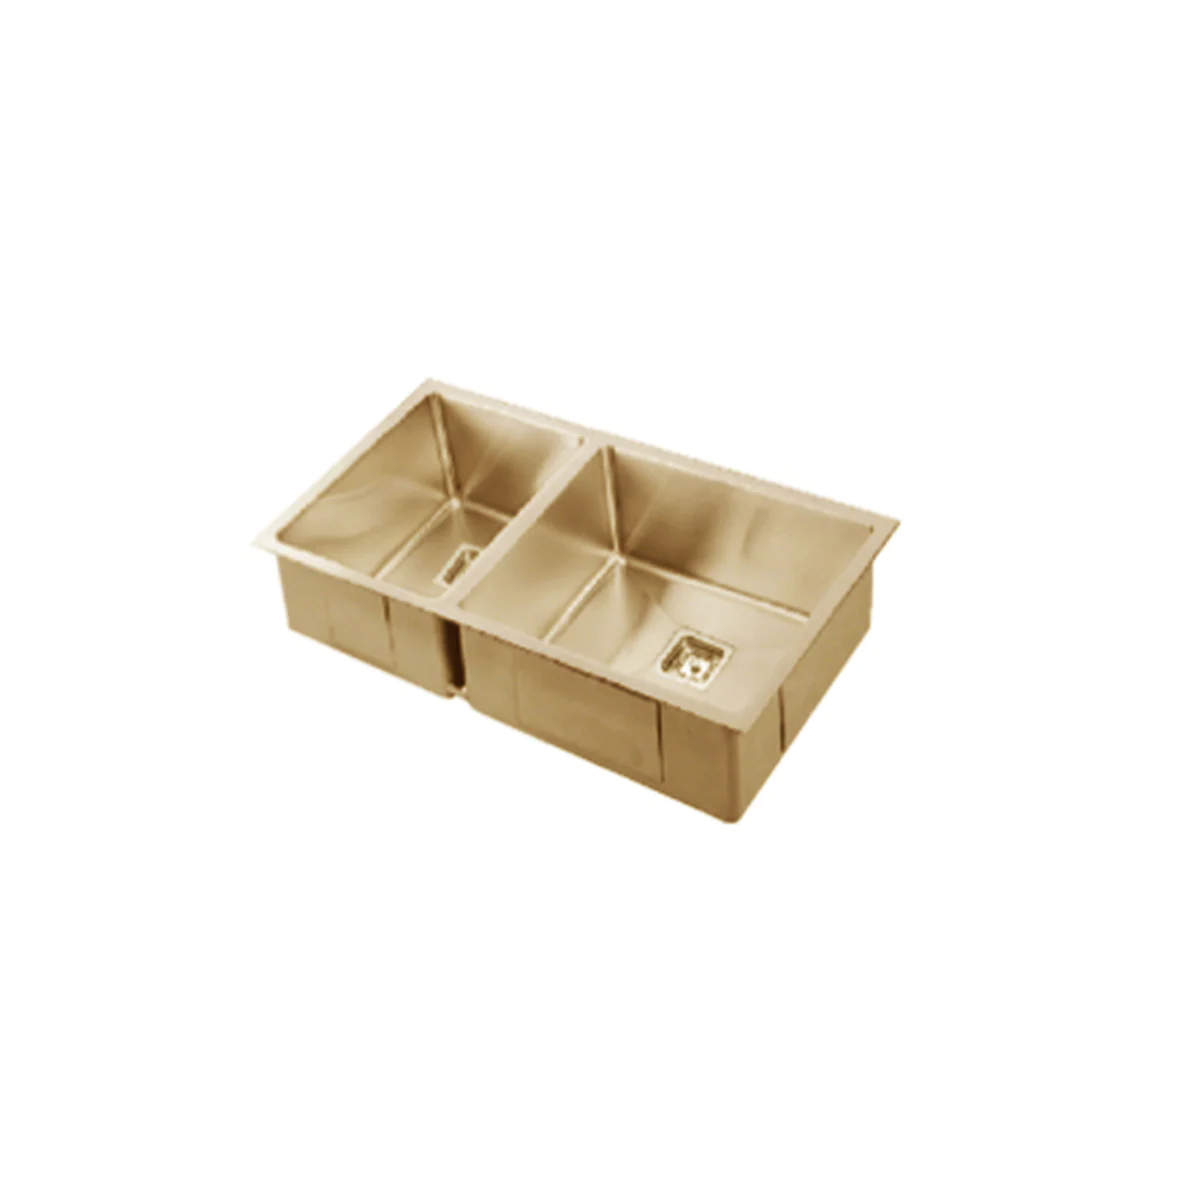 VEROTTI INOX 1 3/4 BOWL UNIVERSAL STAINLESS STEEL KITCHEN SINK BRUSHED BRASS 765MM (AVAILABLE IN LEFT OR RIGHT CONFIGURATION)